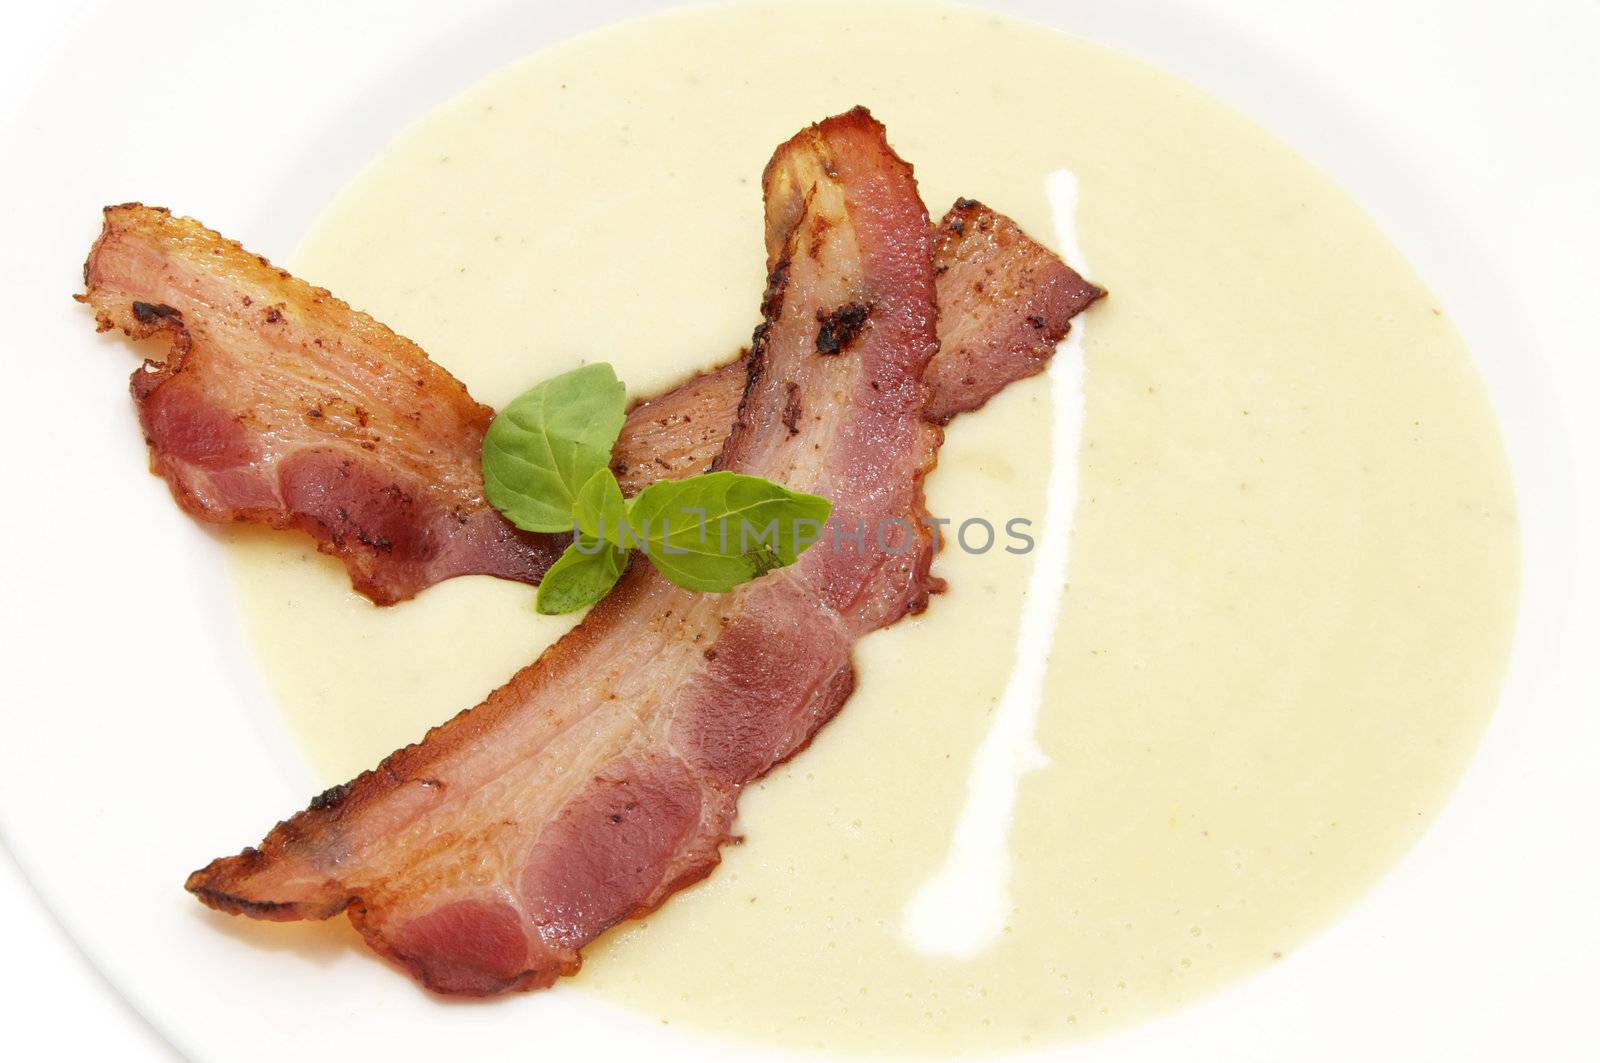 meal pea soup and bacon in a restaurant